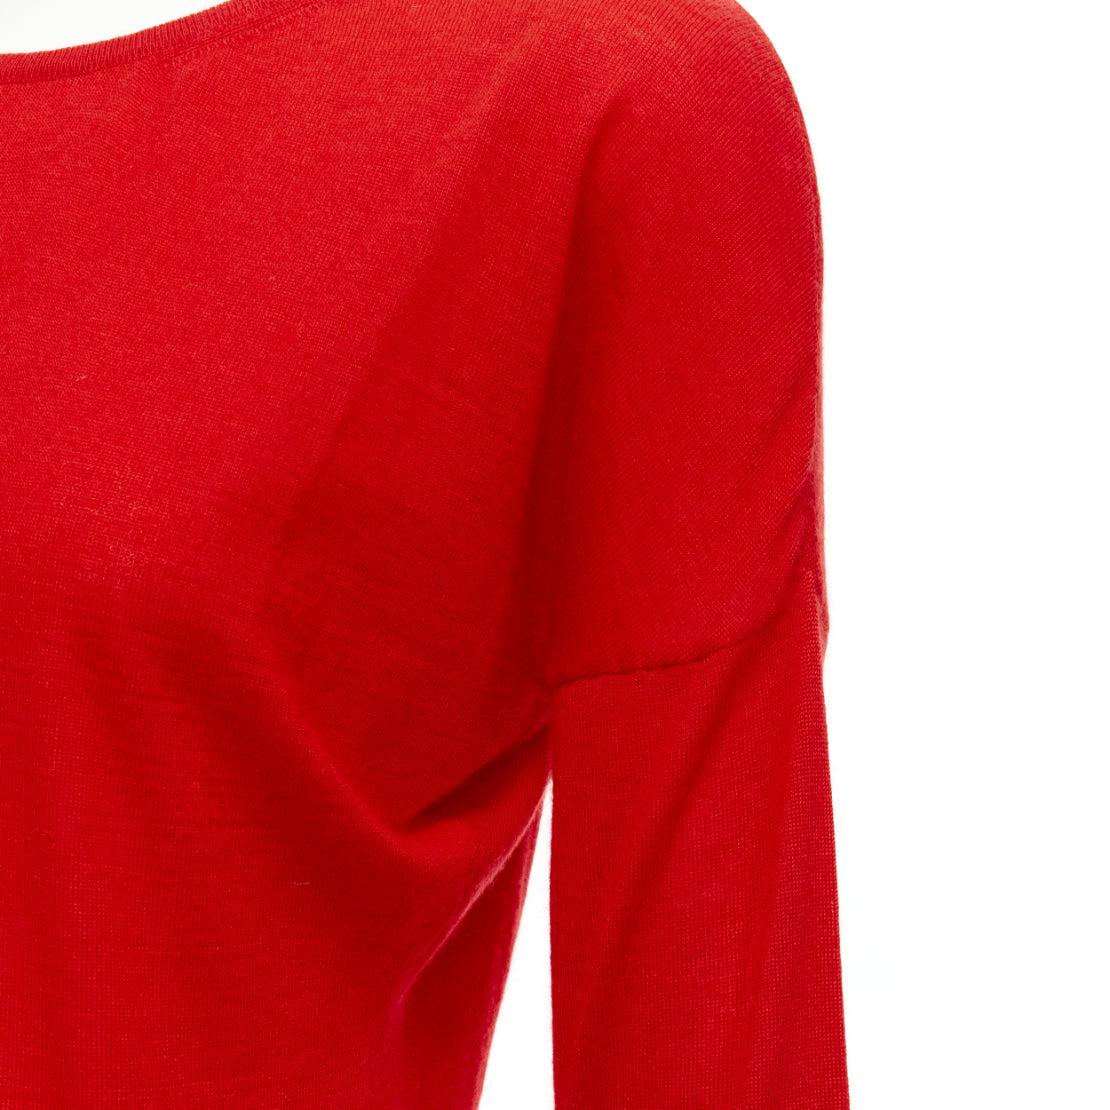 ALEXANDER MCQUEEN 100% cashmere red drop sleeve wide neck sweater top XS
Reference: NKLL/A00146
Brand: Alexander McQueen
Designer: Sarah Burton
Material: Cashmere
Color: Red
Pattern: Solid
Closure: Pullover
Made in: Italy

CONDITION:
Condition: